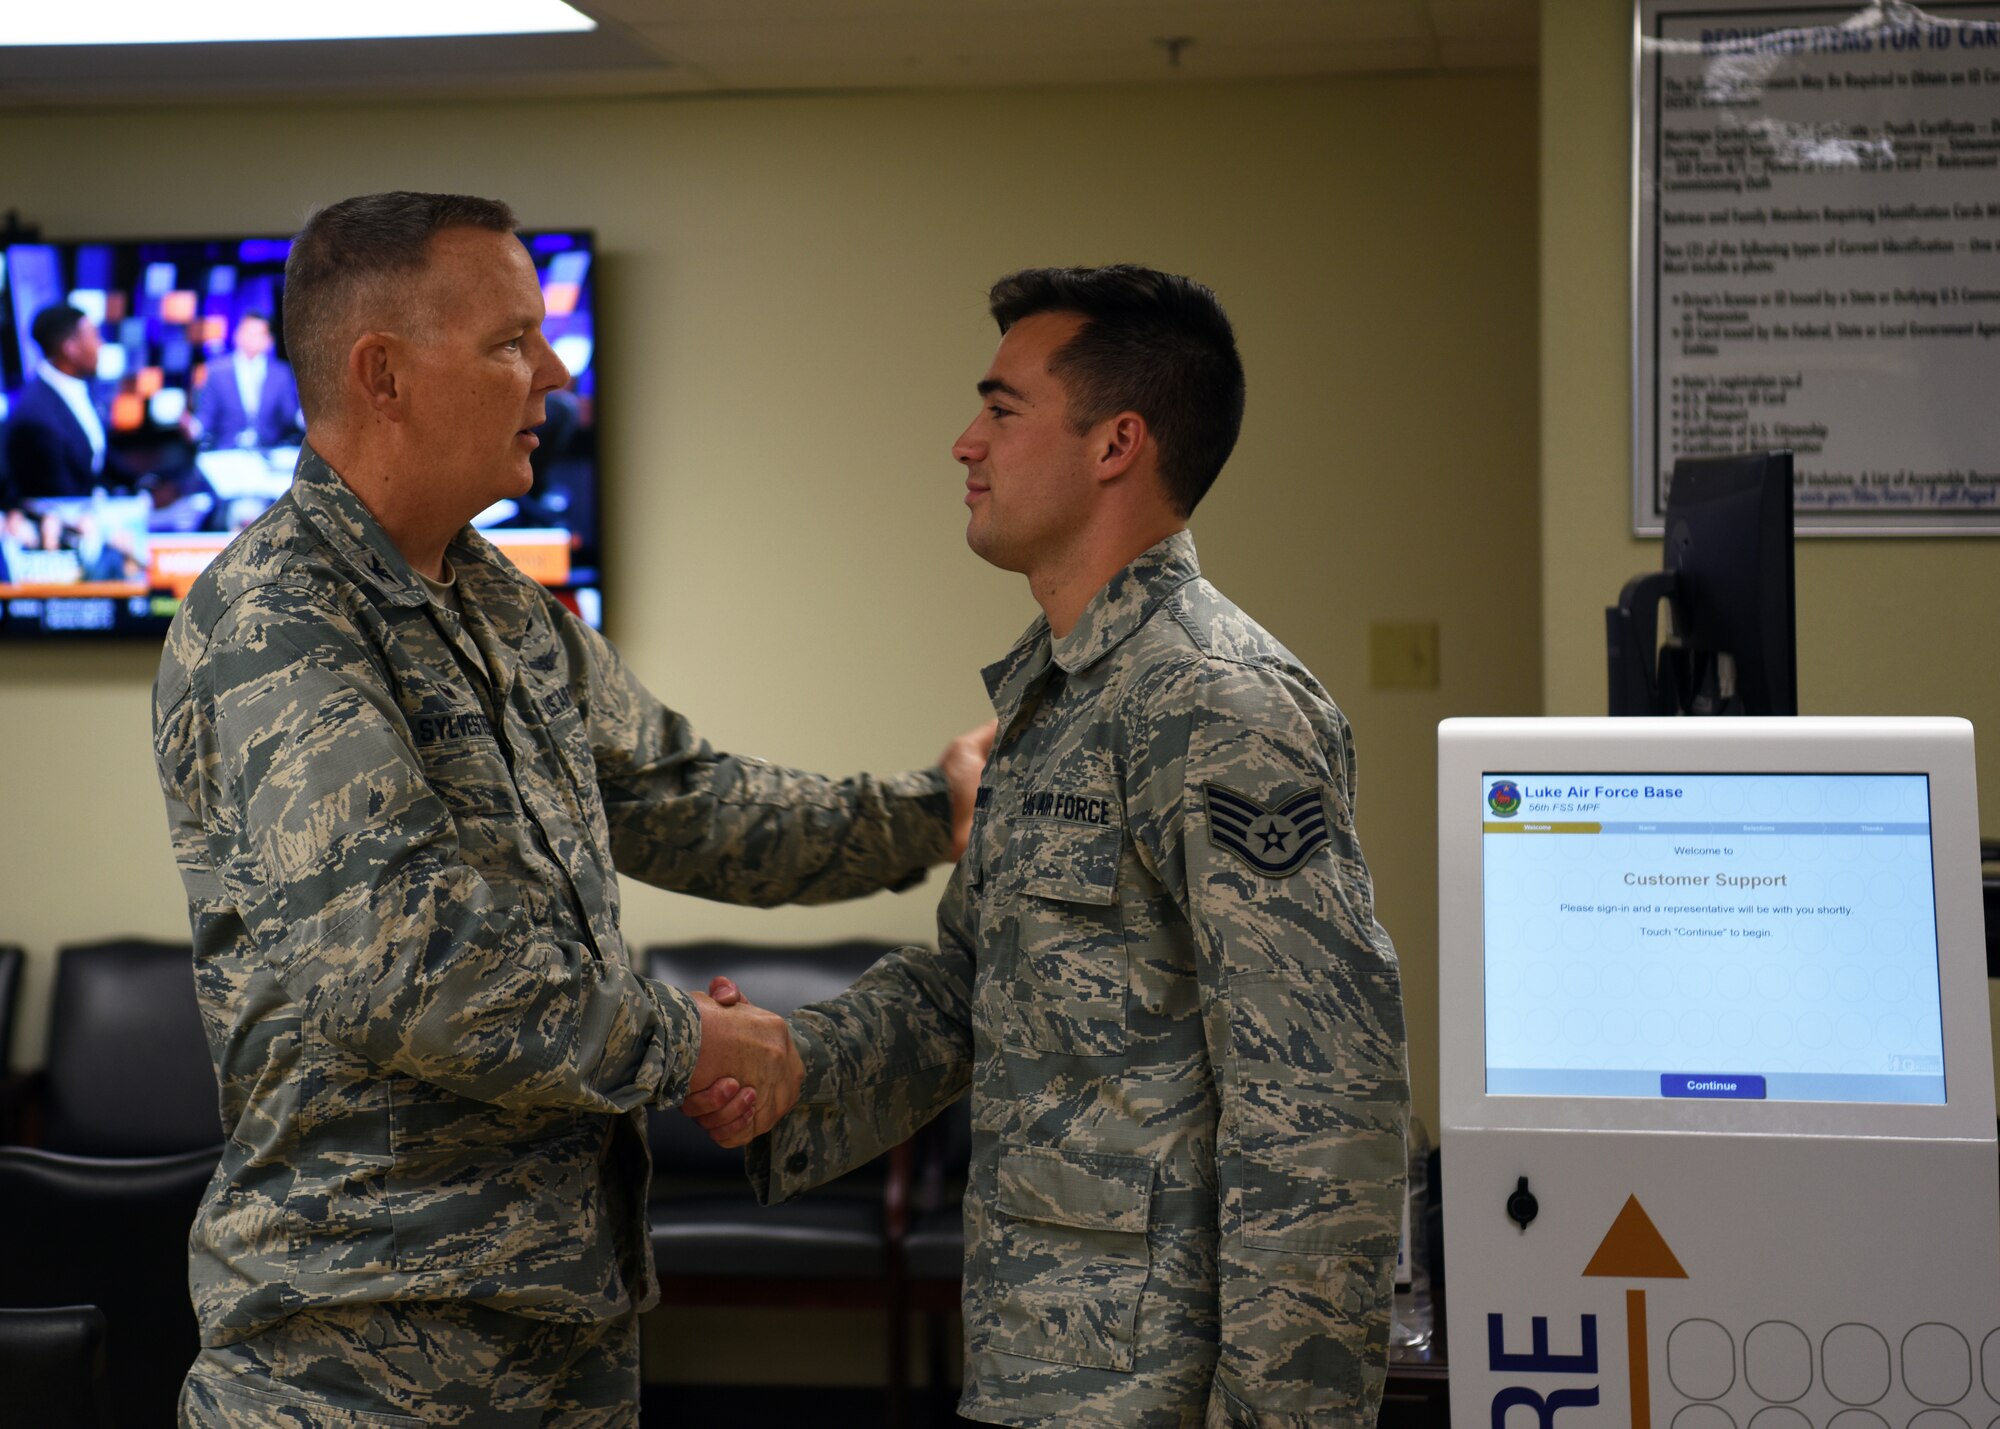 U.S. Air Force Staff Sgt. Cameron Moore, 56th Force Support Squadron customer service supervisor, receives a coin from U.S. Air Force Col. Robert Sylvester, 56th Mission Support Group commander, Aug. 29, 2018 at Luke Air Force Base, Ariz.